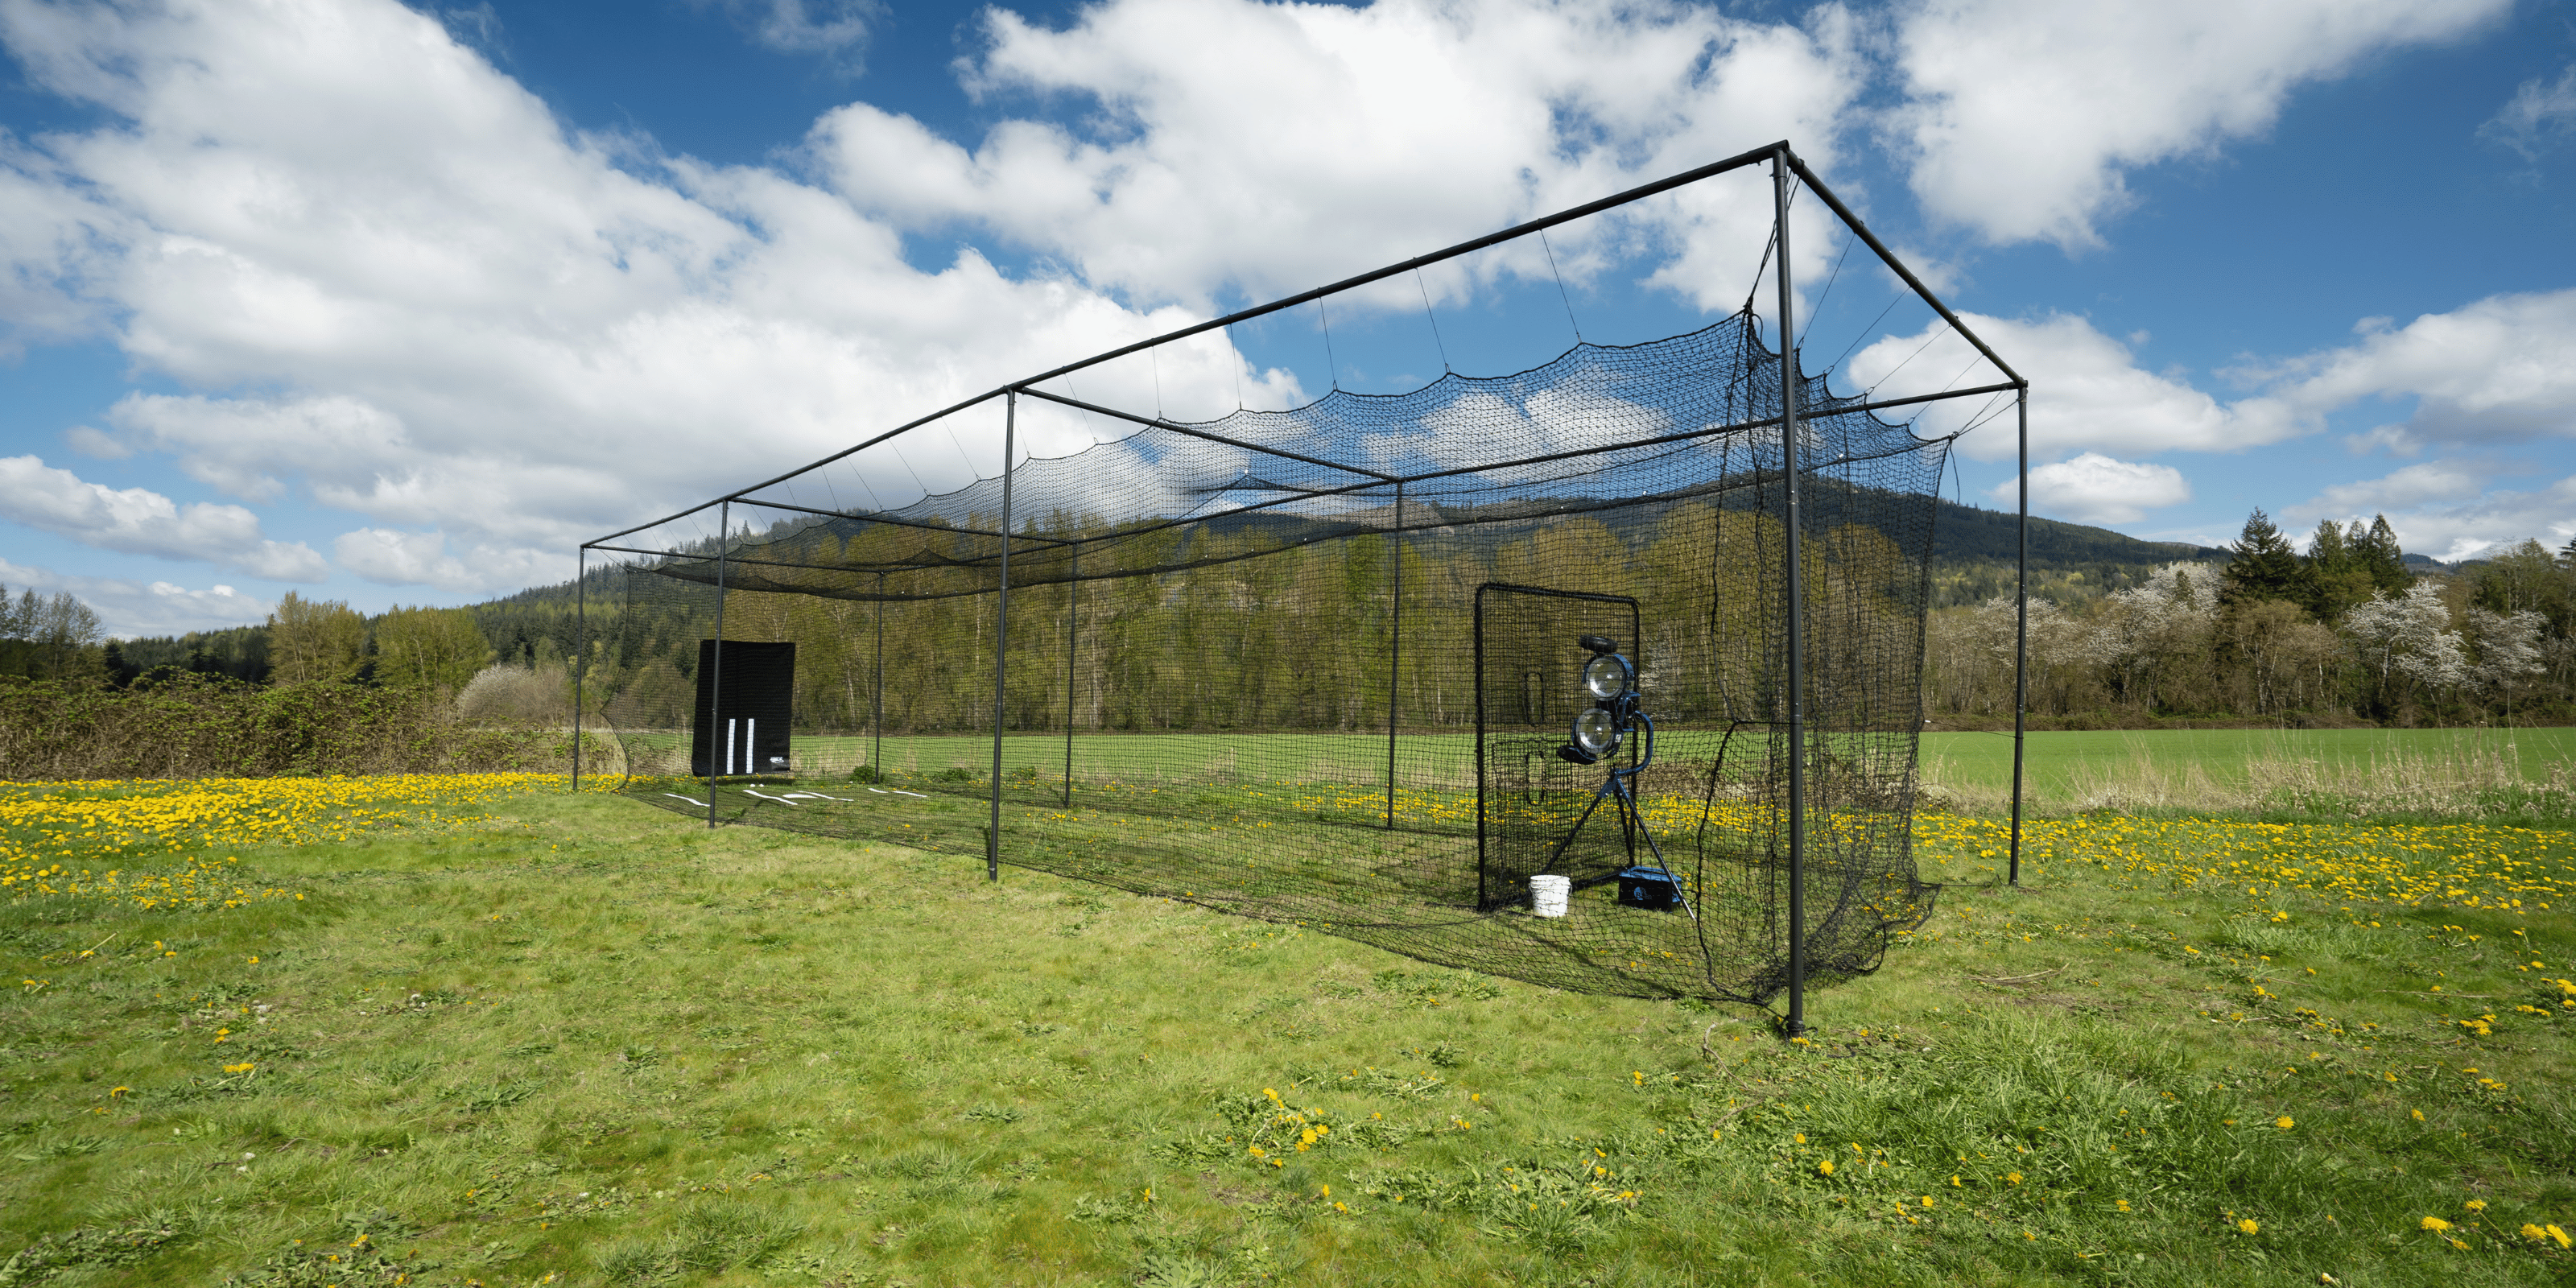 Thumper batting cage with vinyl backdrop, pitching machine, screen, and mat on top of green grass with blue skies